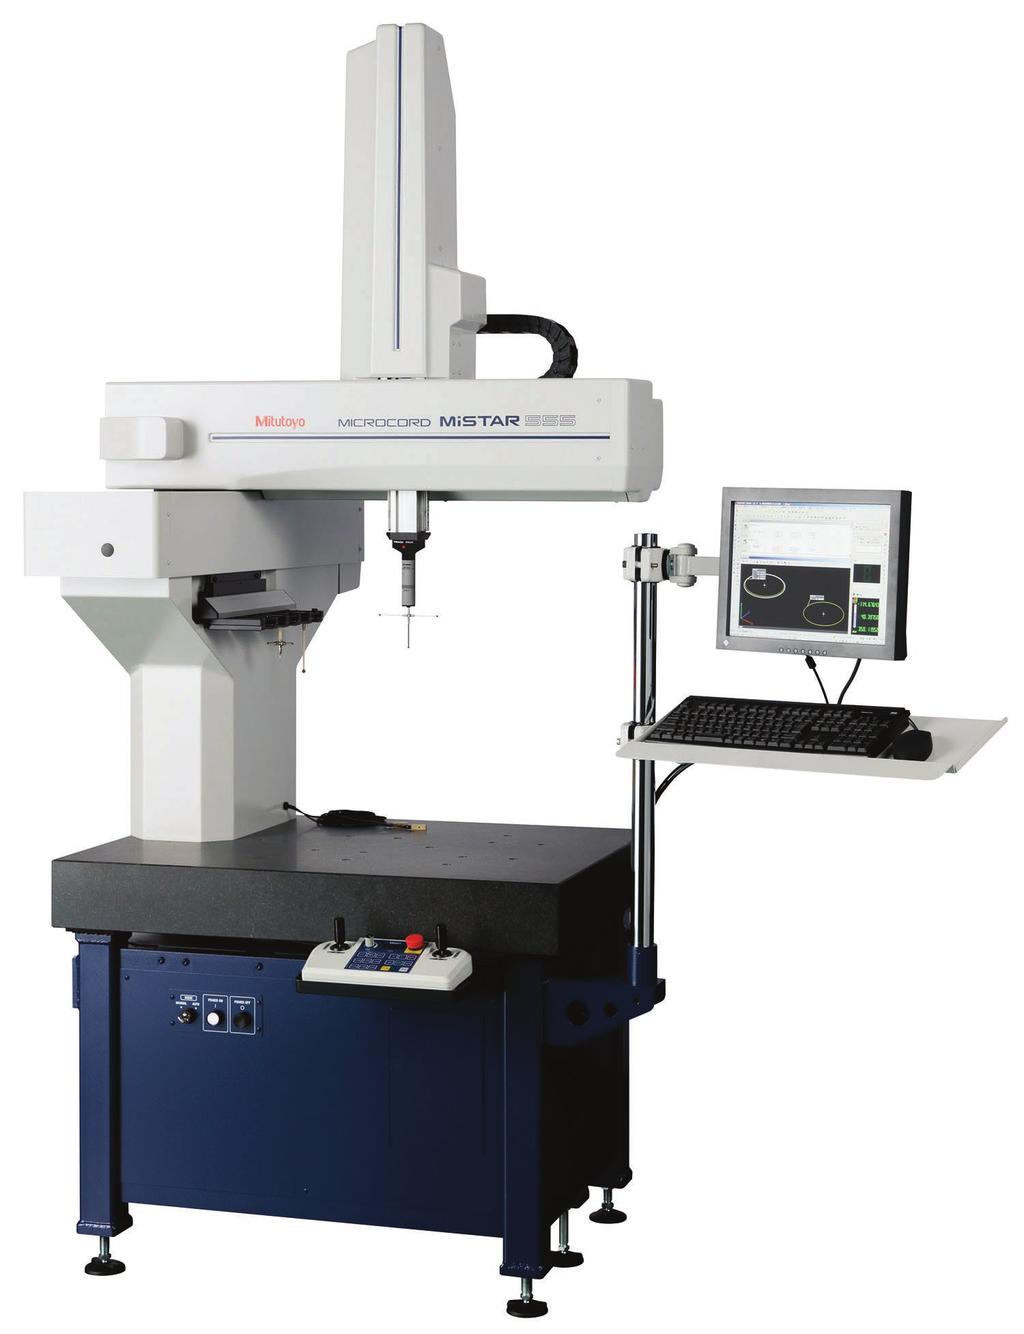 MiStar Shop Floor CC Type CMM High performance/cost ratio in a compact CMM featuring high environmental resistance and maintainability.